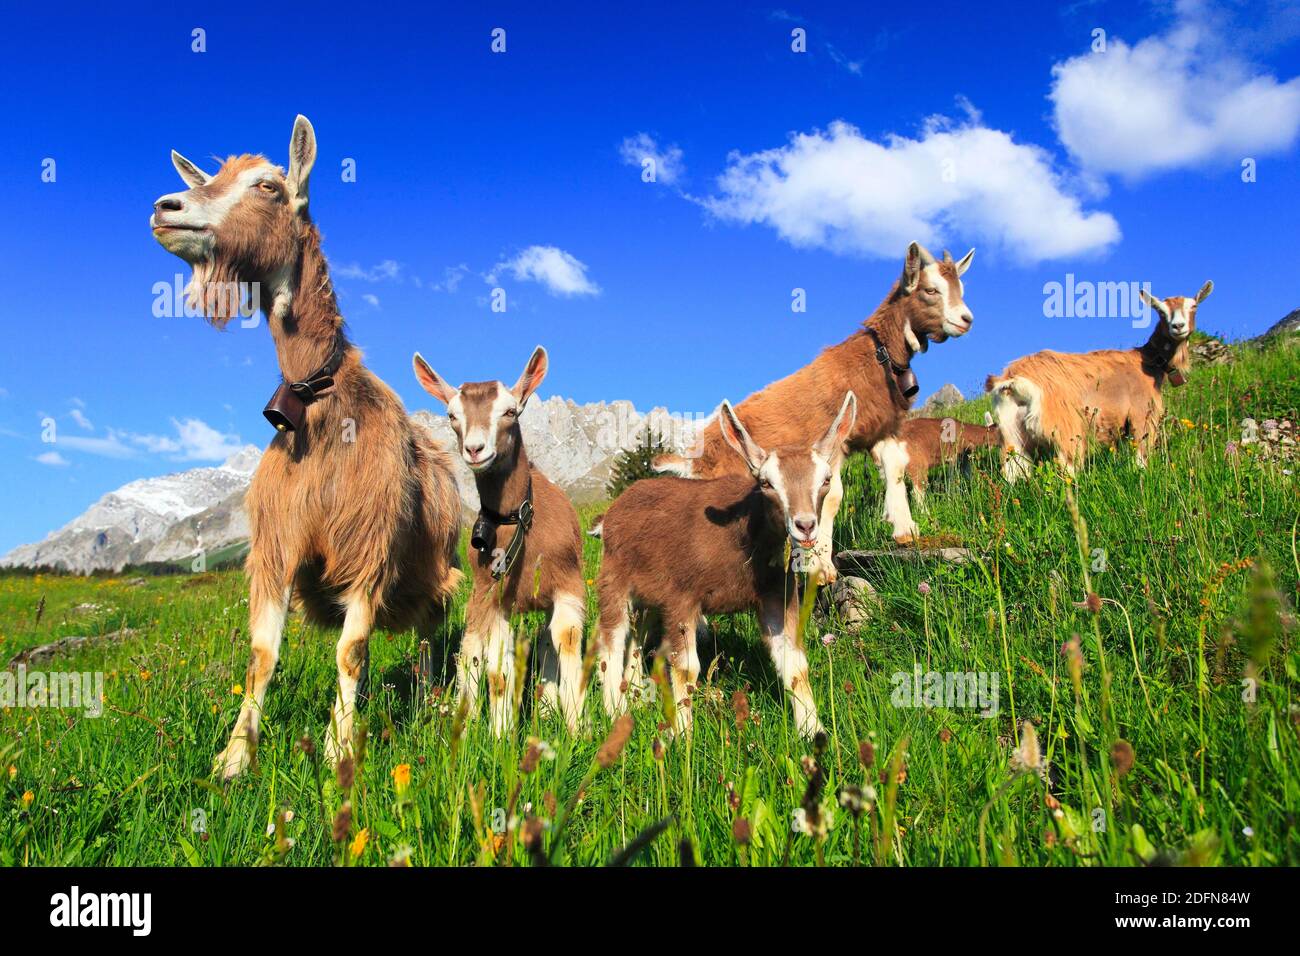 House goats on the alp, goat, goats, females and young animals, Alpstein massif, Appenzell, Switzerland Stock Photo